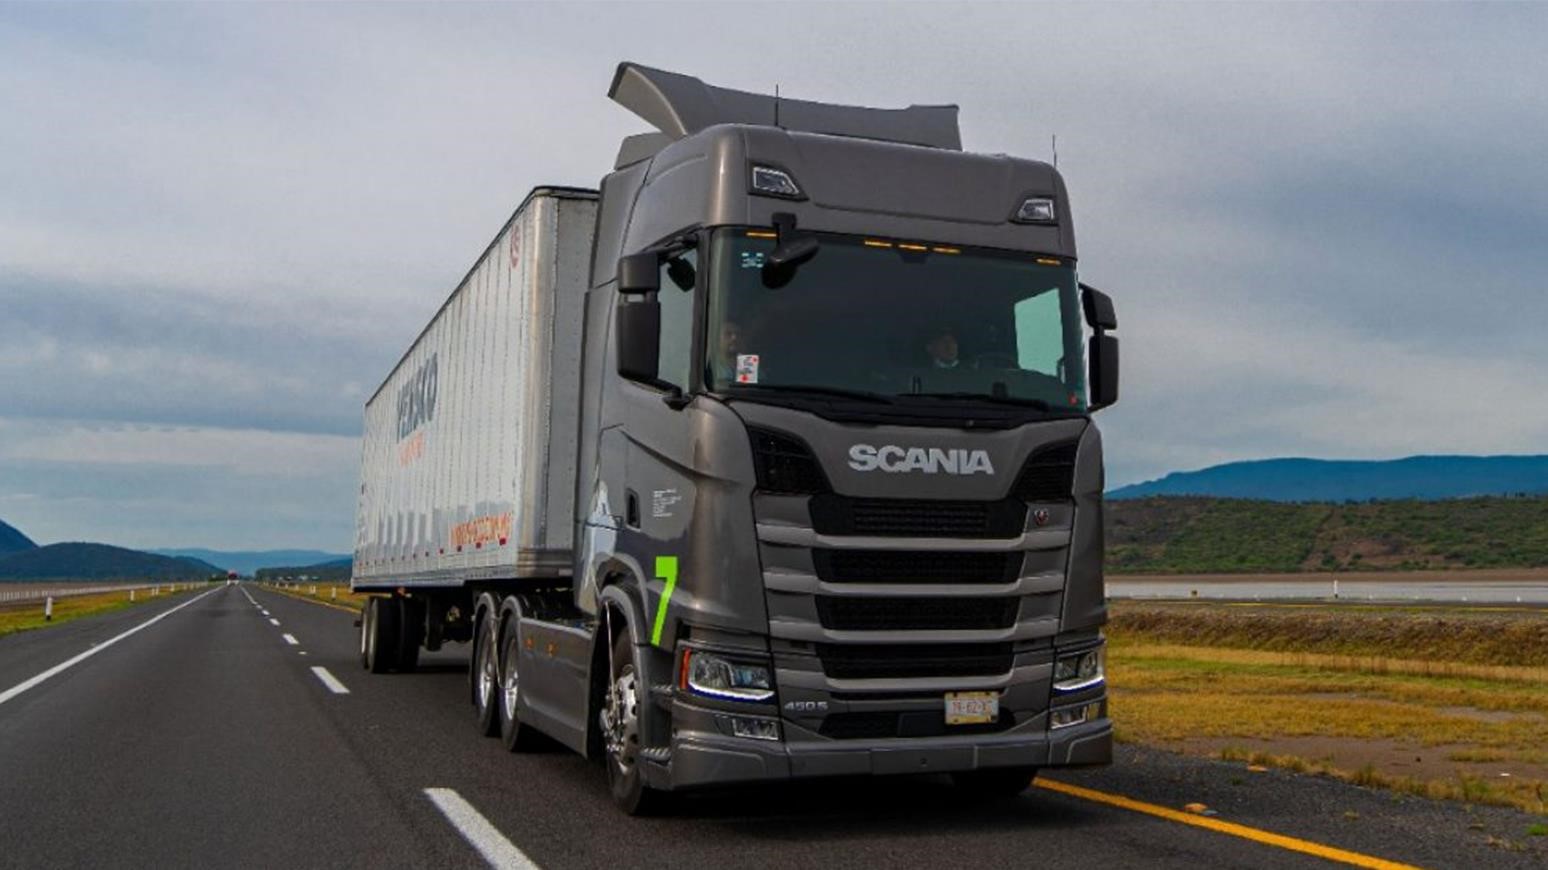 Vensco Transportes Implements Driver Training Programme Led By Scania Mexico’s Master Drivers